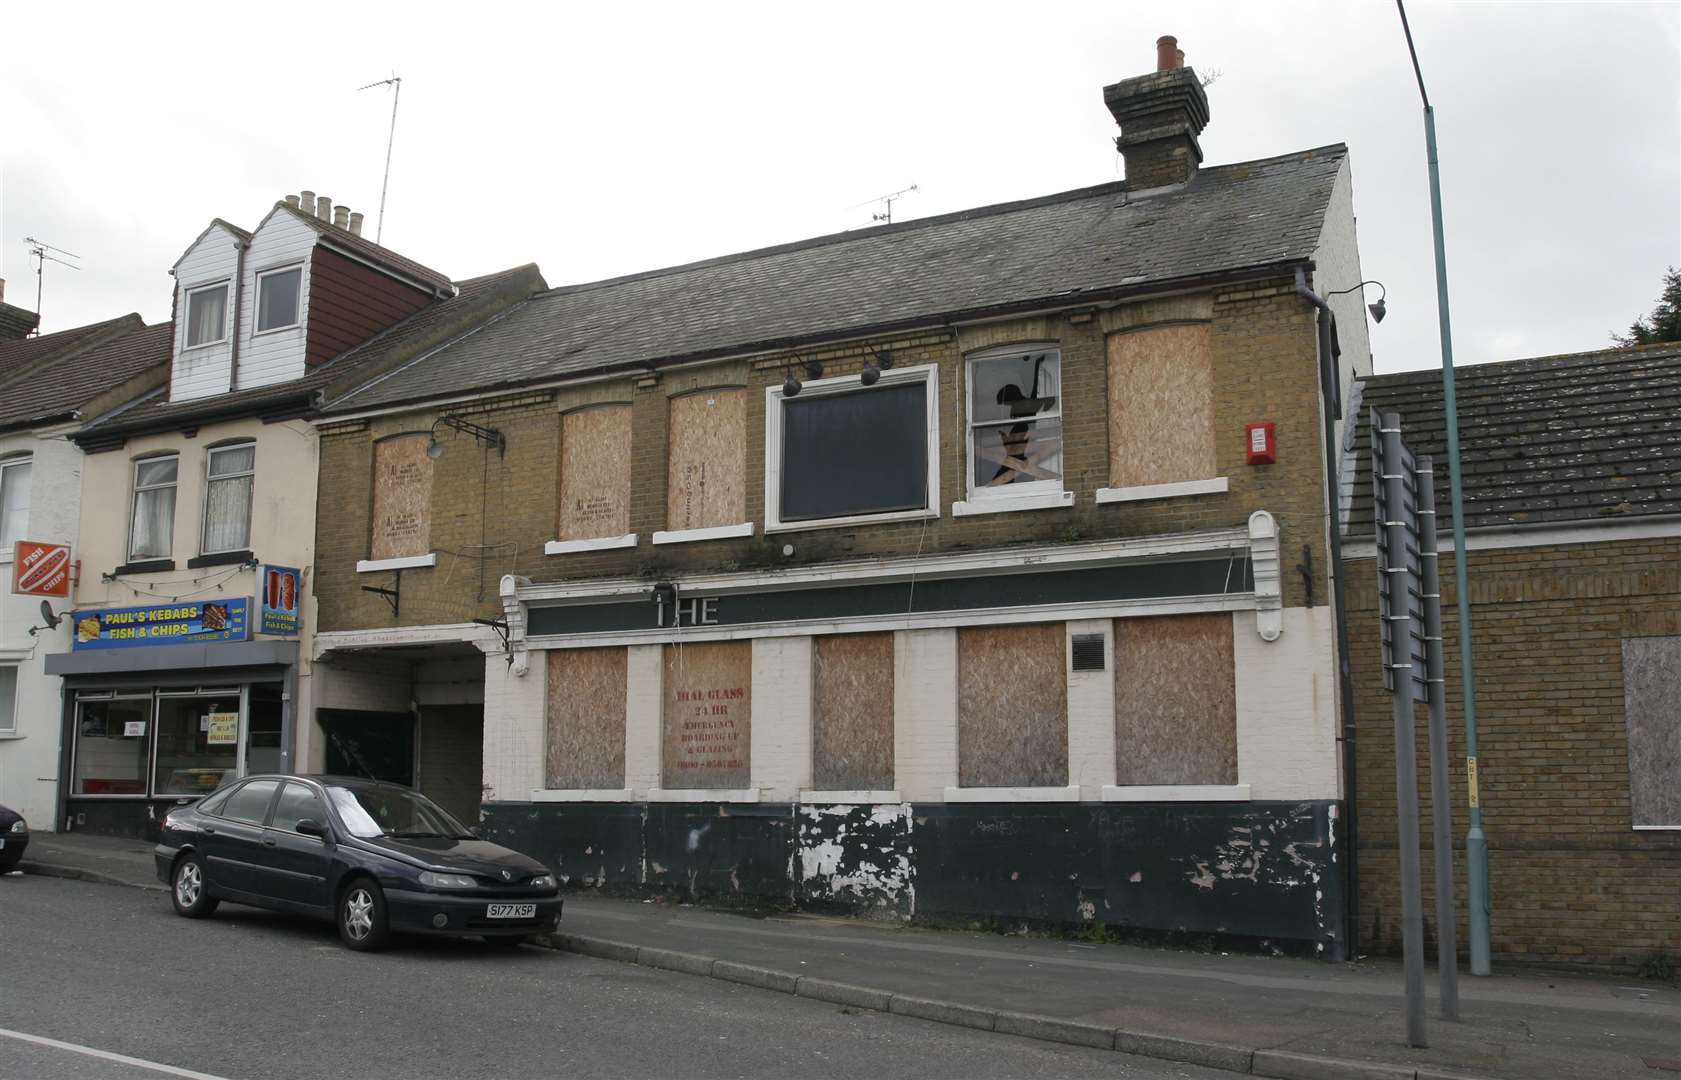 The Green Dragon in Ingram Road, Gillingham pictured in September 2009, after its closure